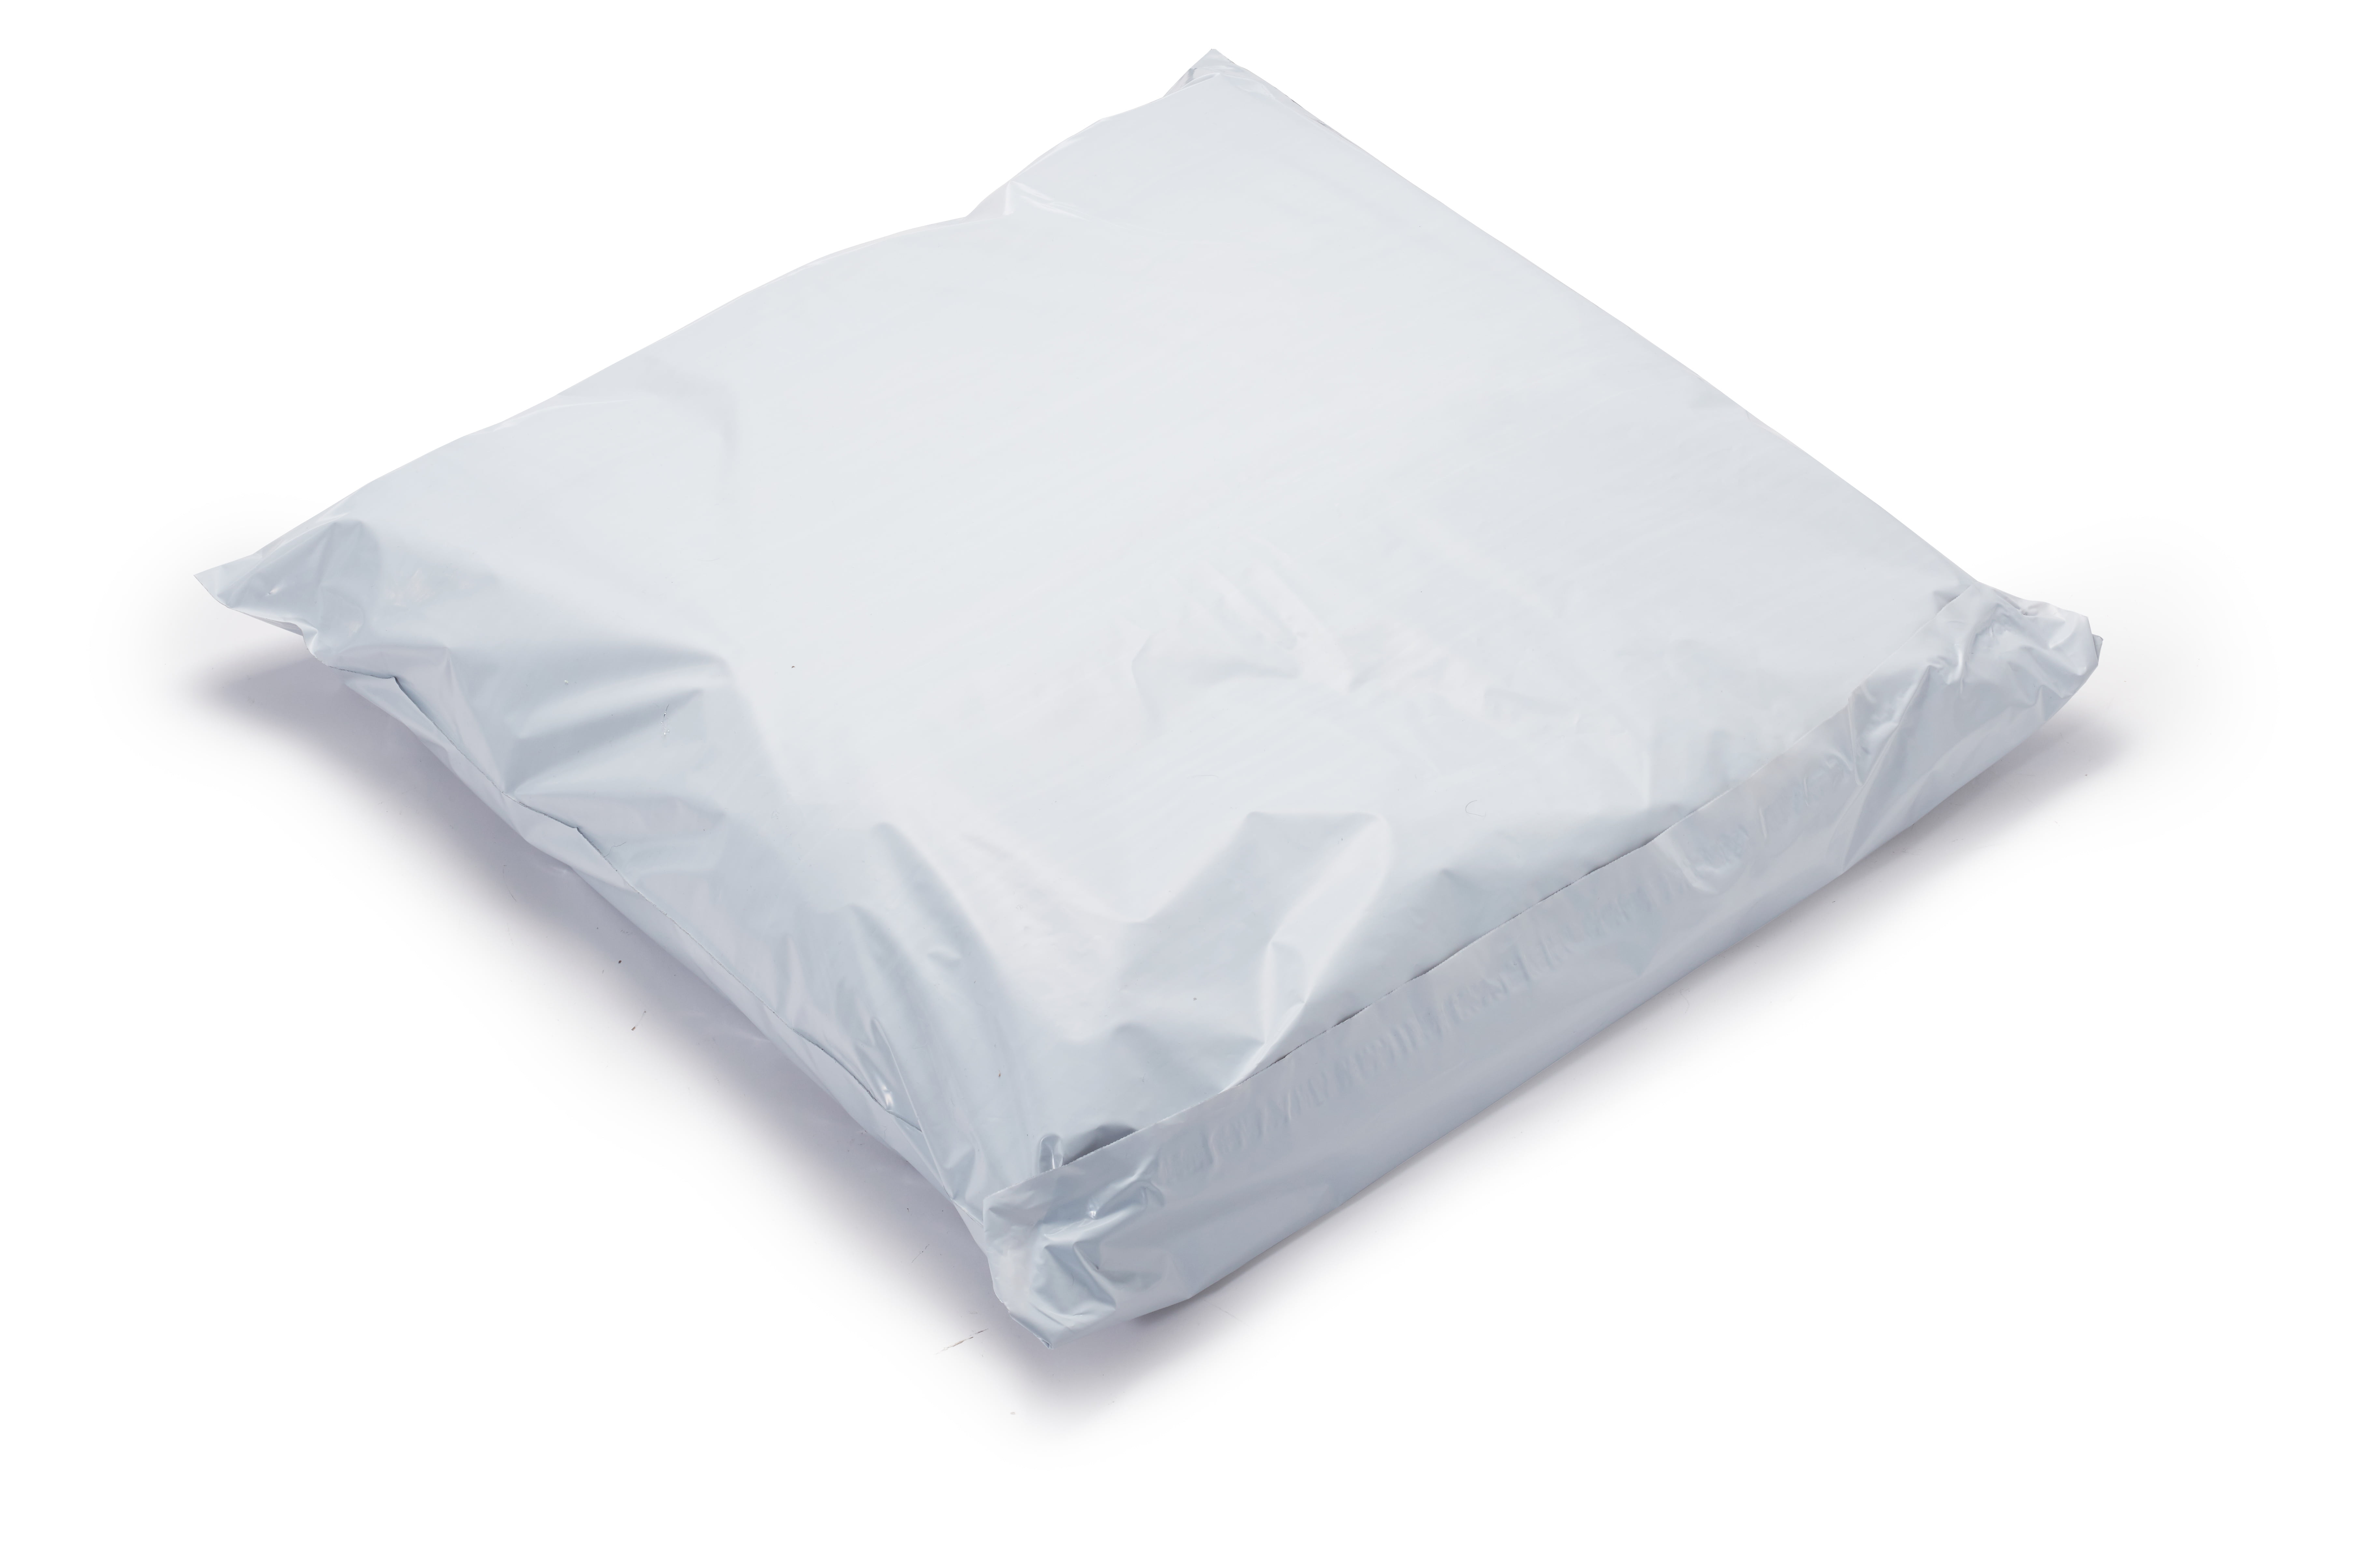 Small Self Adhesive White Poly Mailer Bag Mailing Express Packing